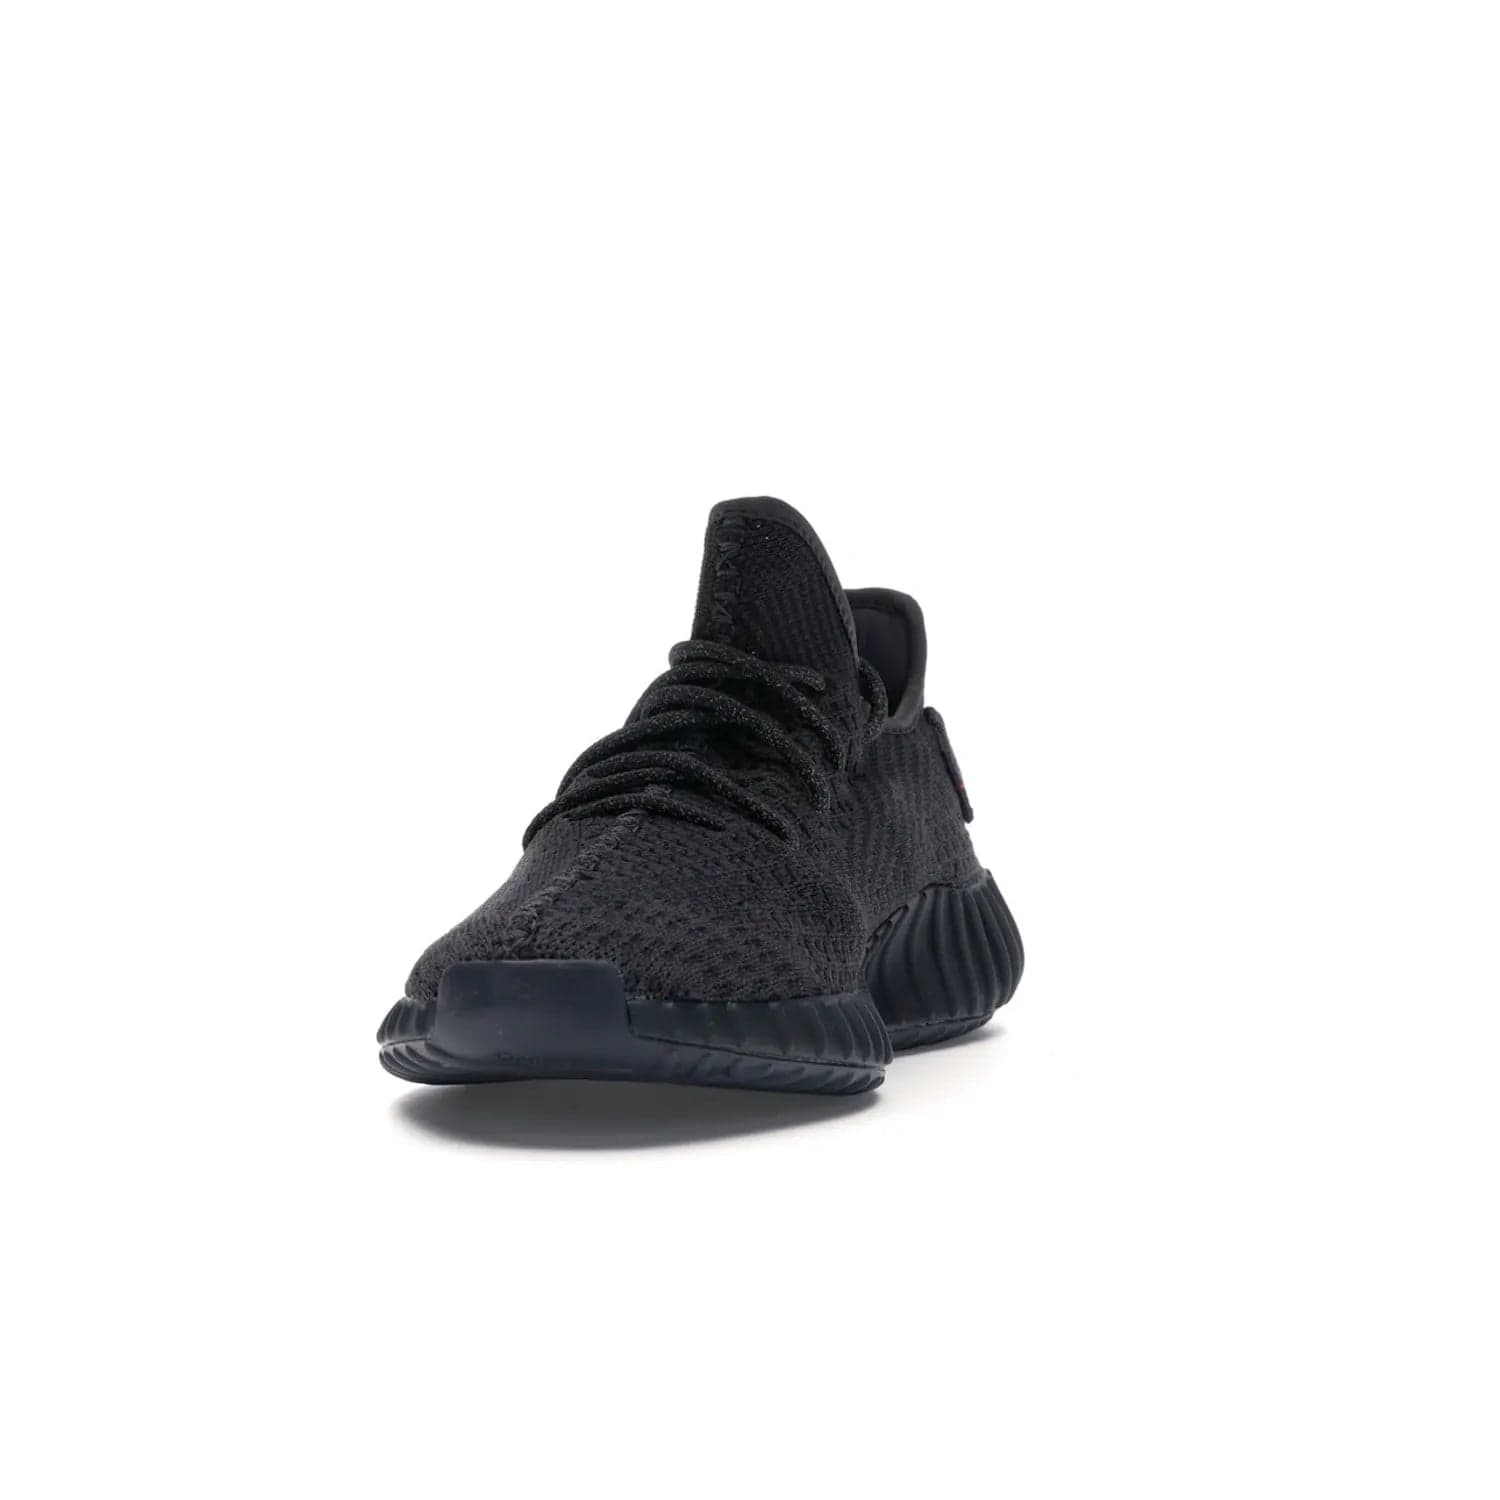 adidas Yeezy Boost 350 V2 Black (Non-Reflective) - Image 12 - Only at www.BallersClubKickz.com - A timeless, sleek silhouette crafted from quality materials. The adidas Yeezy Boost 350 V2 Black (Non-Reflective) brings style and sophistication. Get yours now!